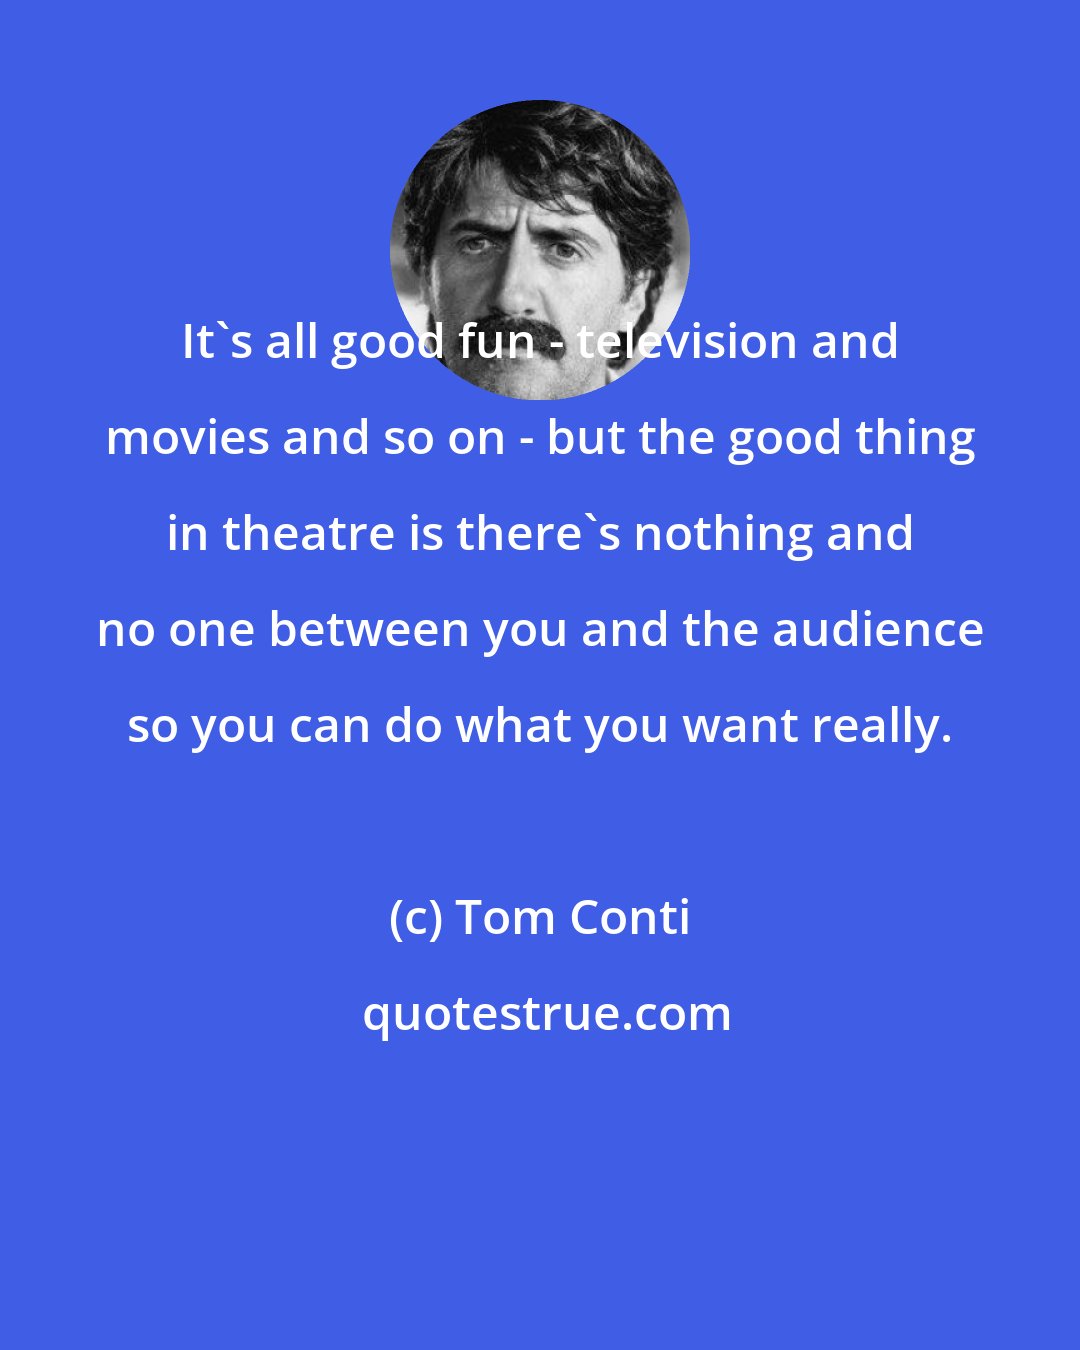 Tom Conti: It's all good fun - television and movies and so on - but the good thing in theatre is there's nothing and no one between you and the audience so you can do what you want really.